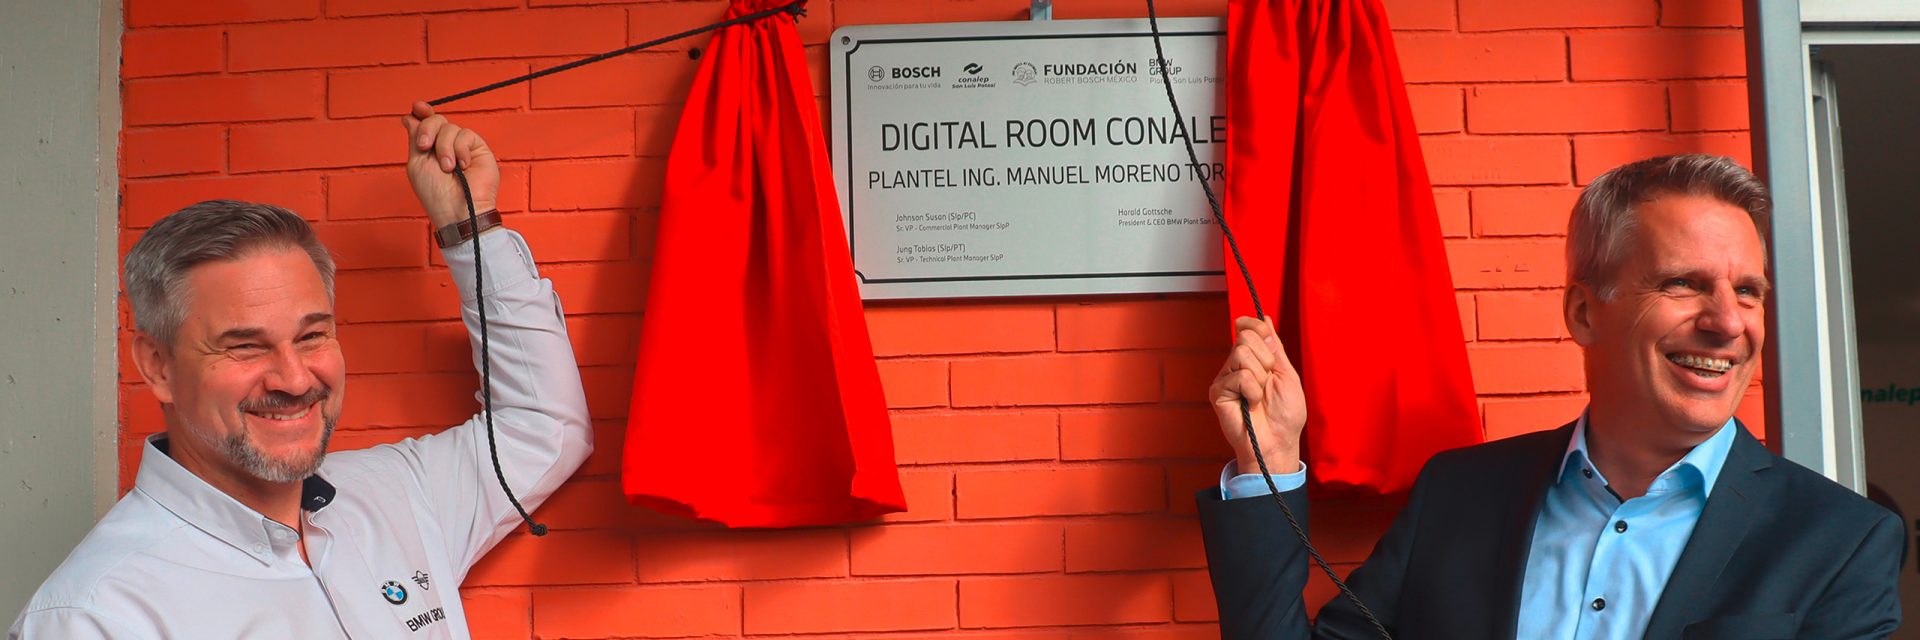 Opening of the digital room